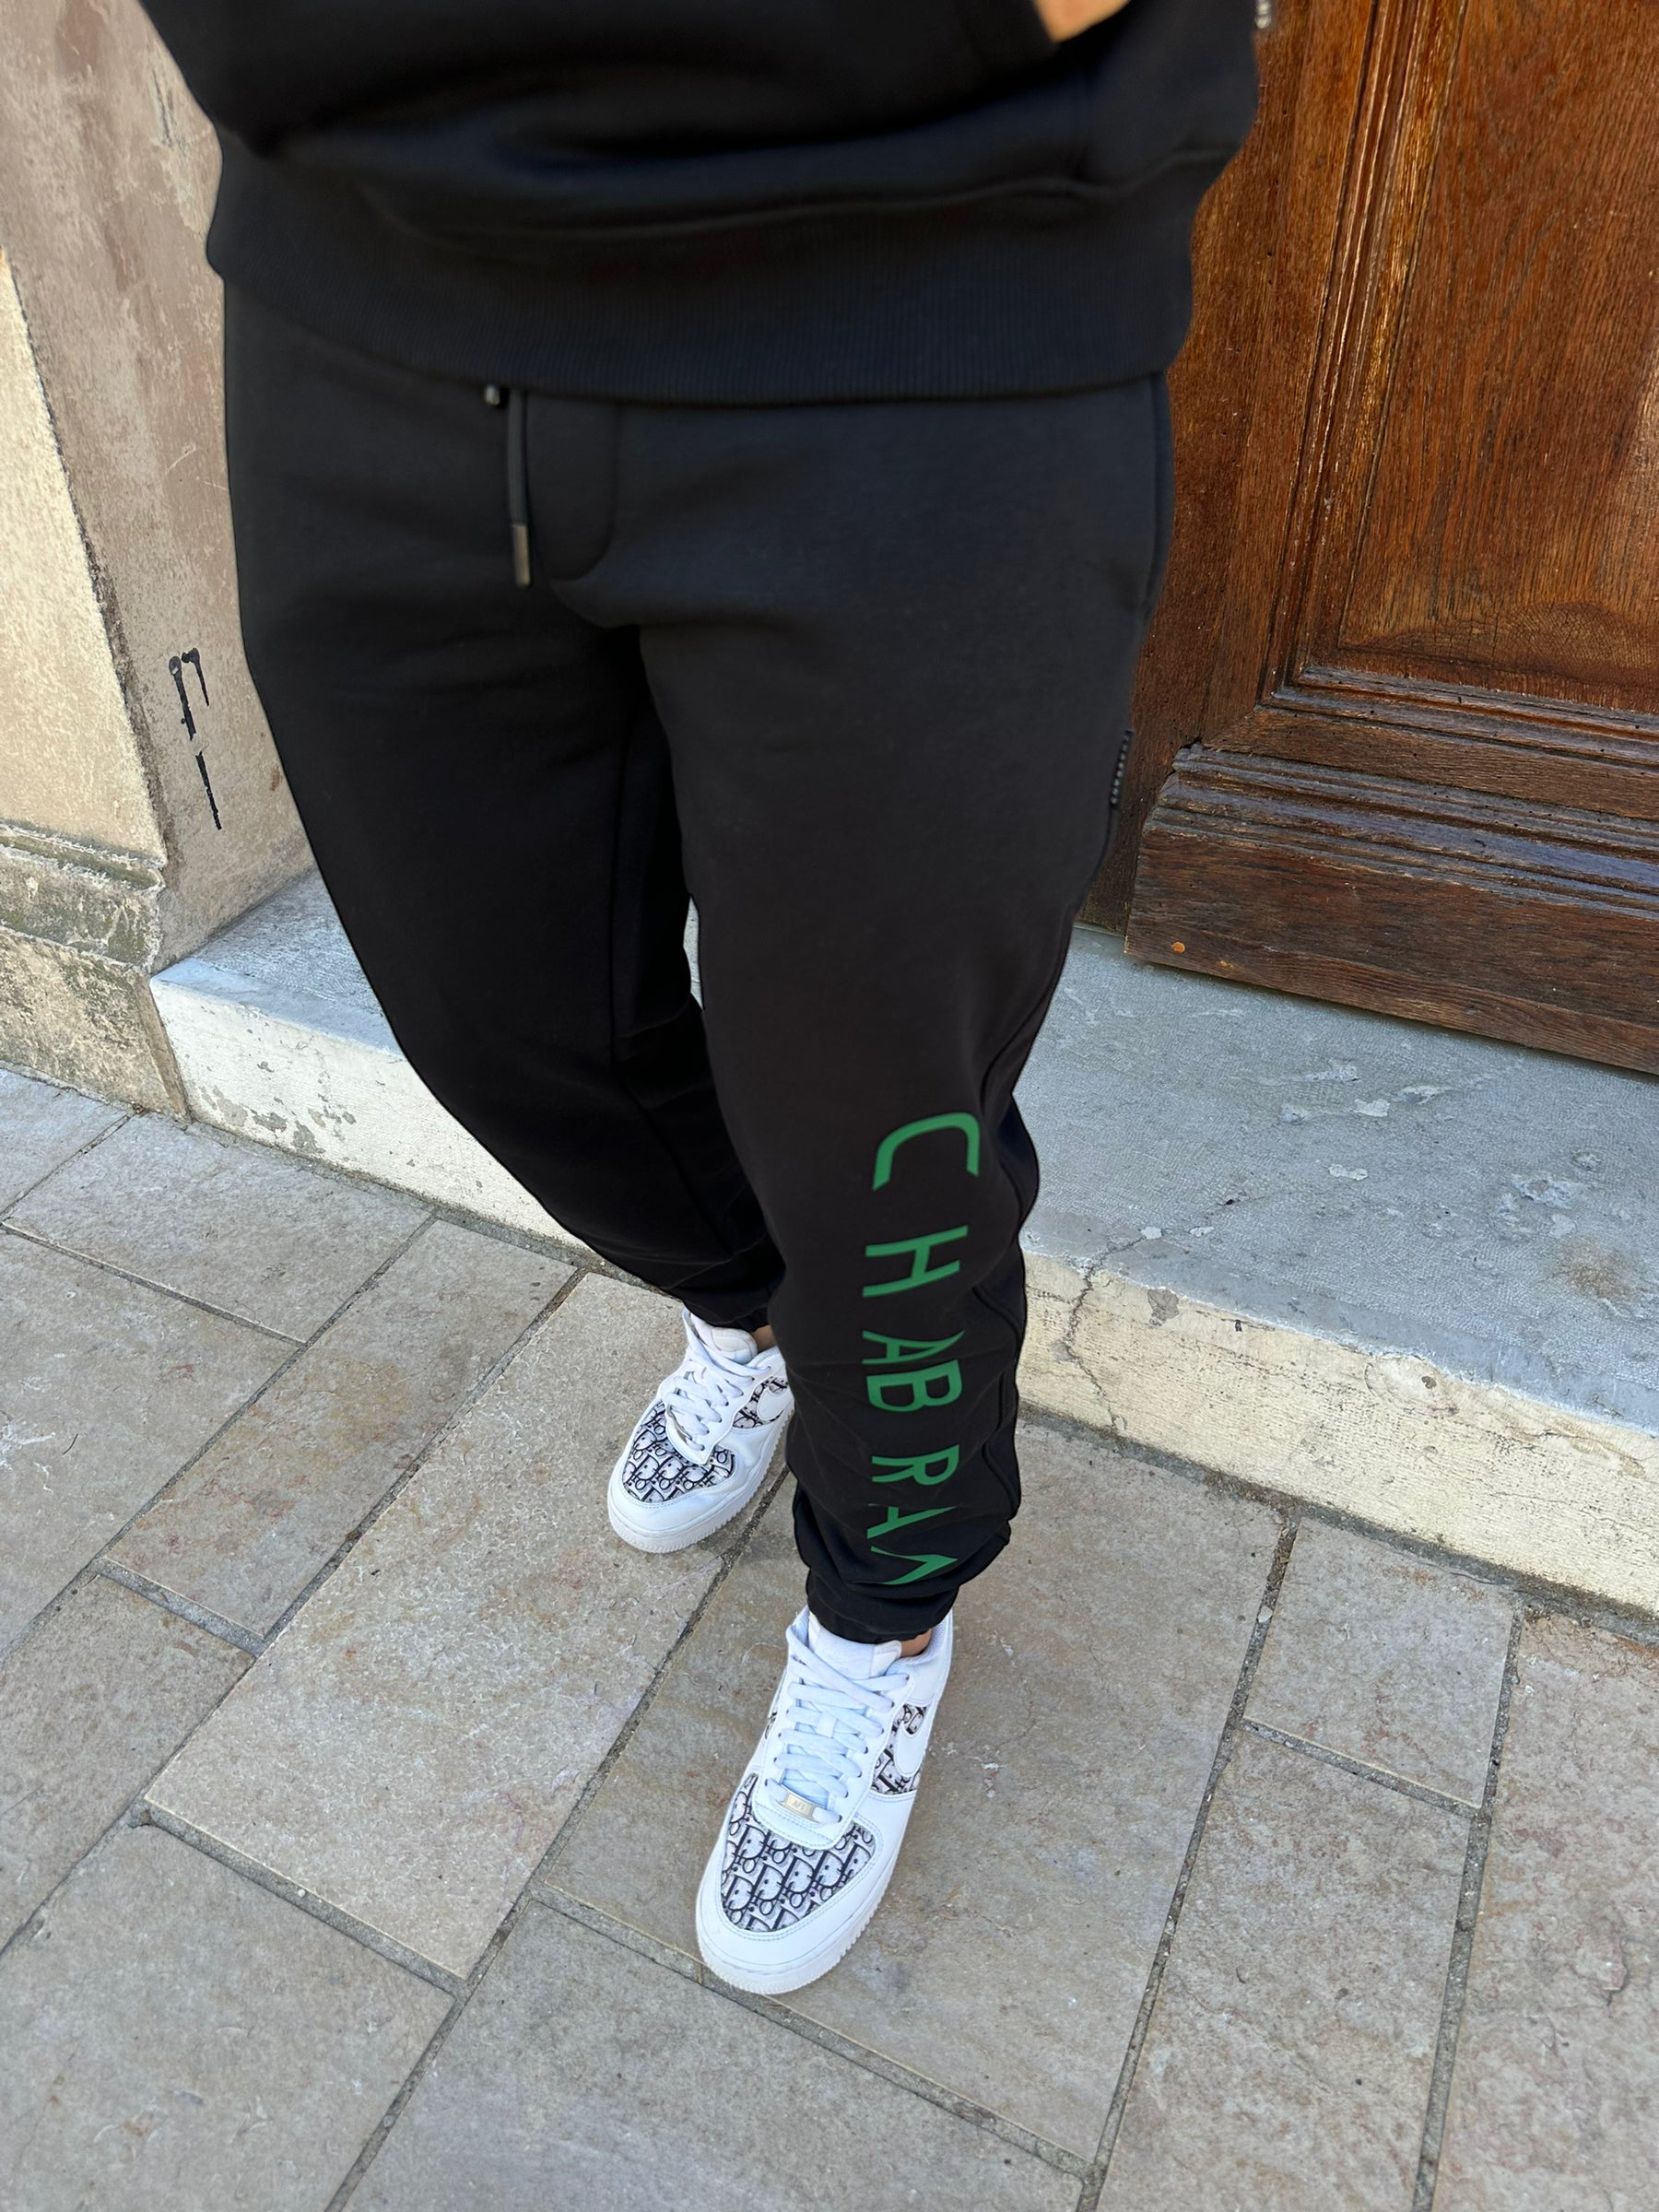 CHABRAND - Black jogging pants with green sign